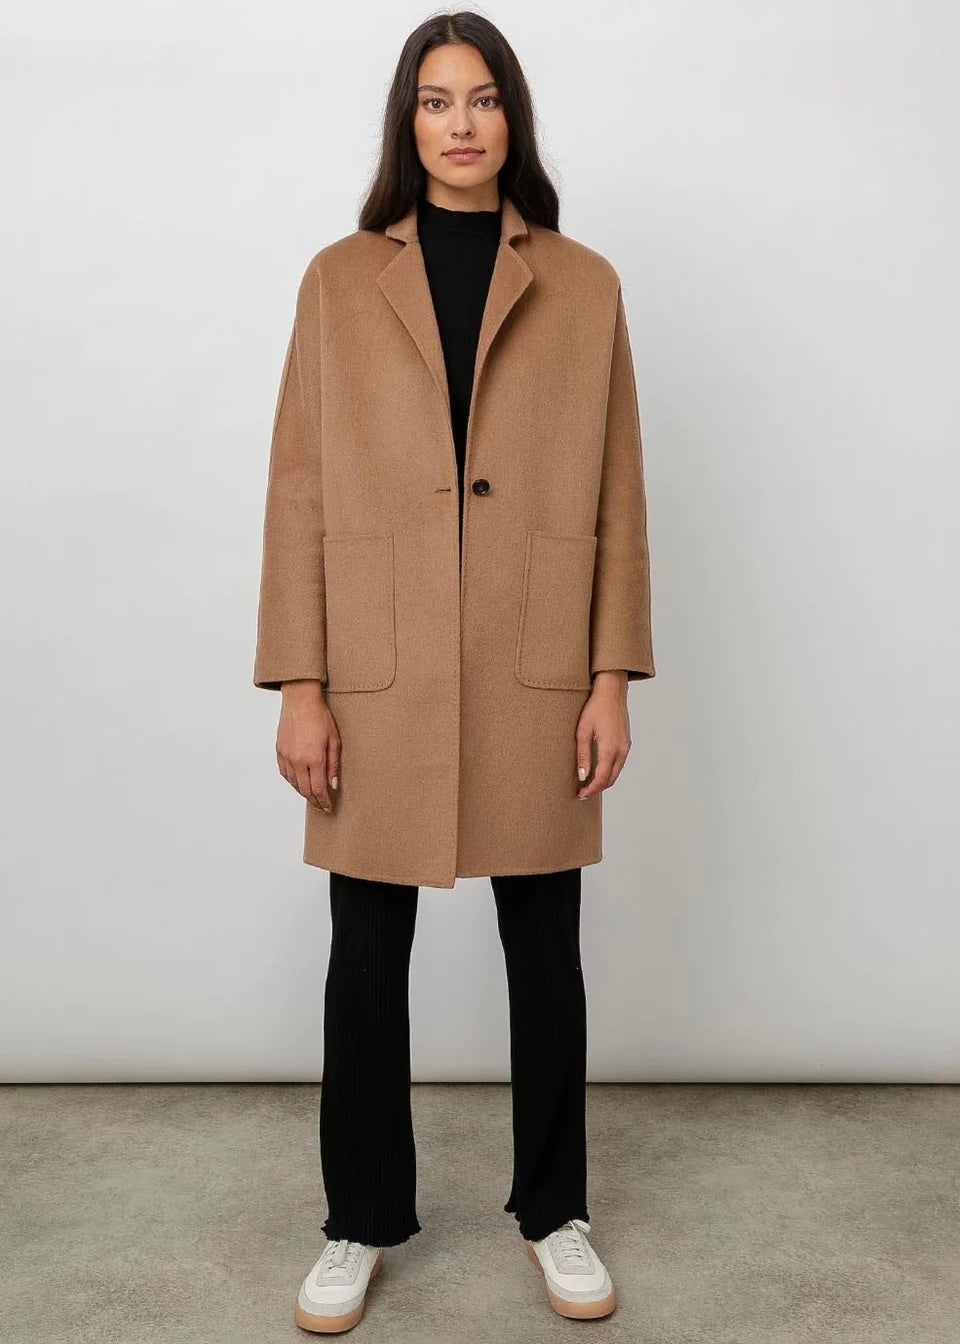 Everest Coat by Rails